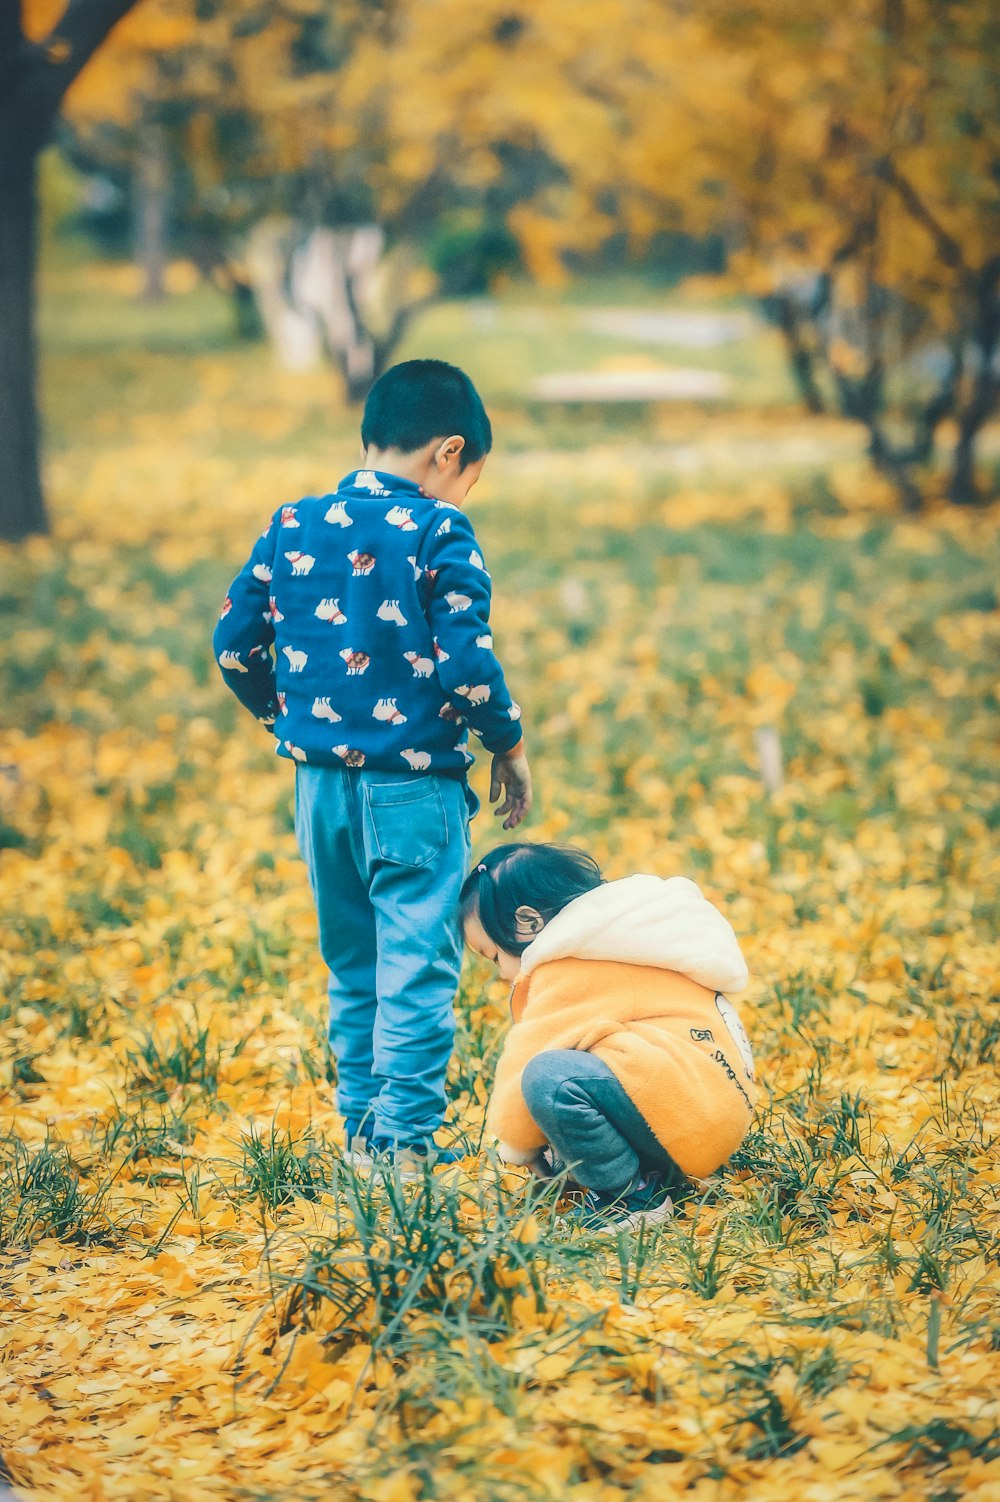 child wearing orange and white jacket picking grass and another child standing while looking down